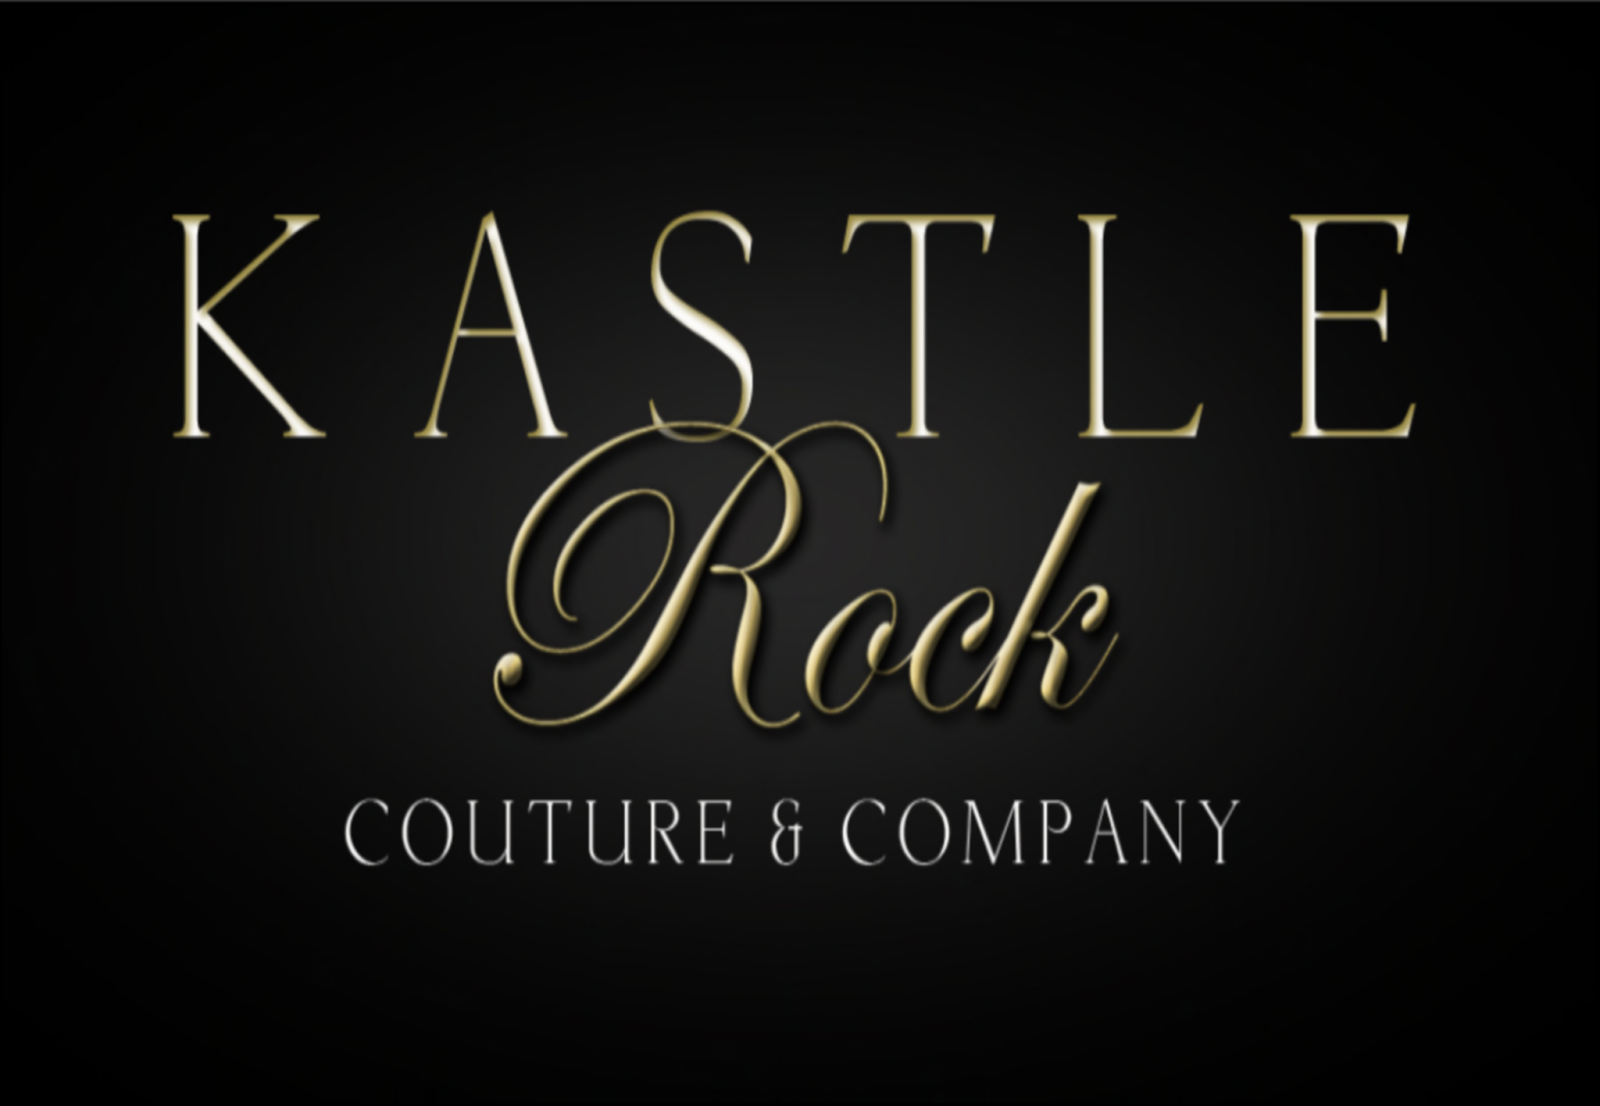 Kastle Rock Couture